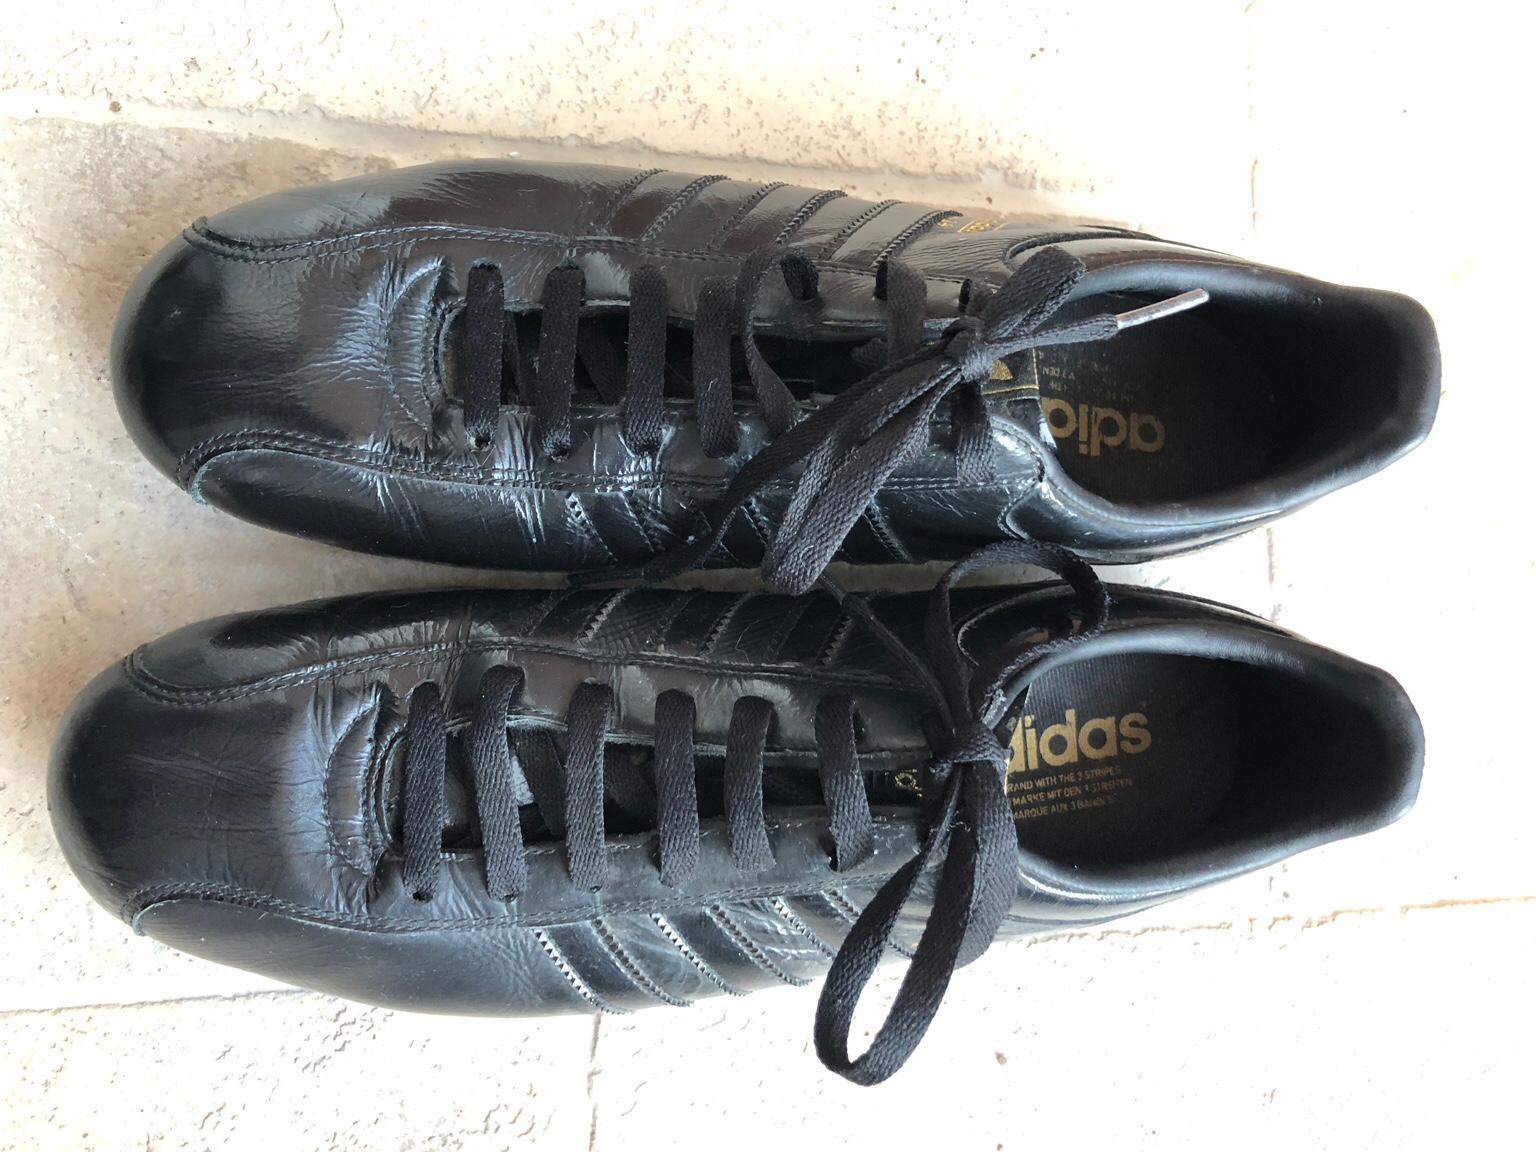 Rare Adidas Adi 14 in size UK 10 in WN6 Lancashire for £15.00 for sale |  Shpock